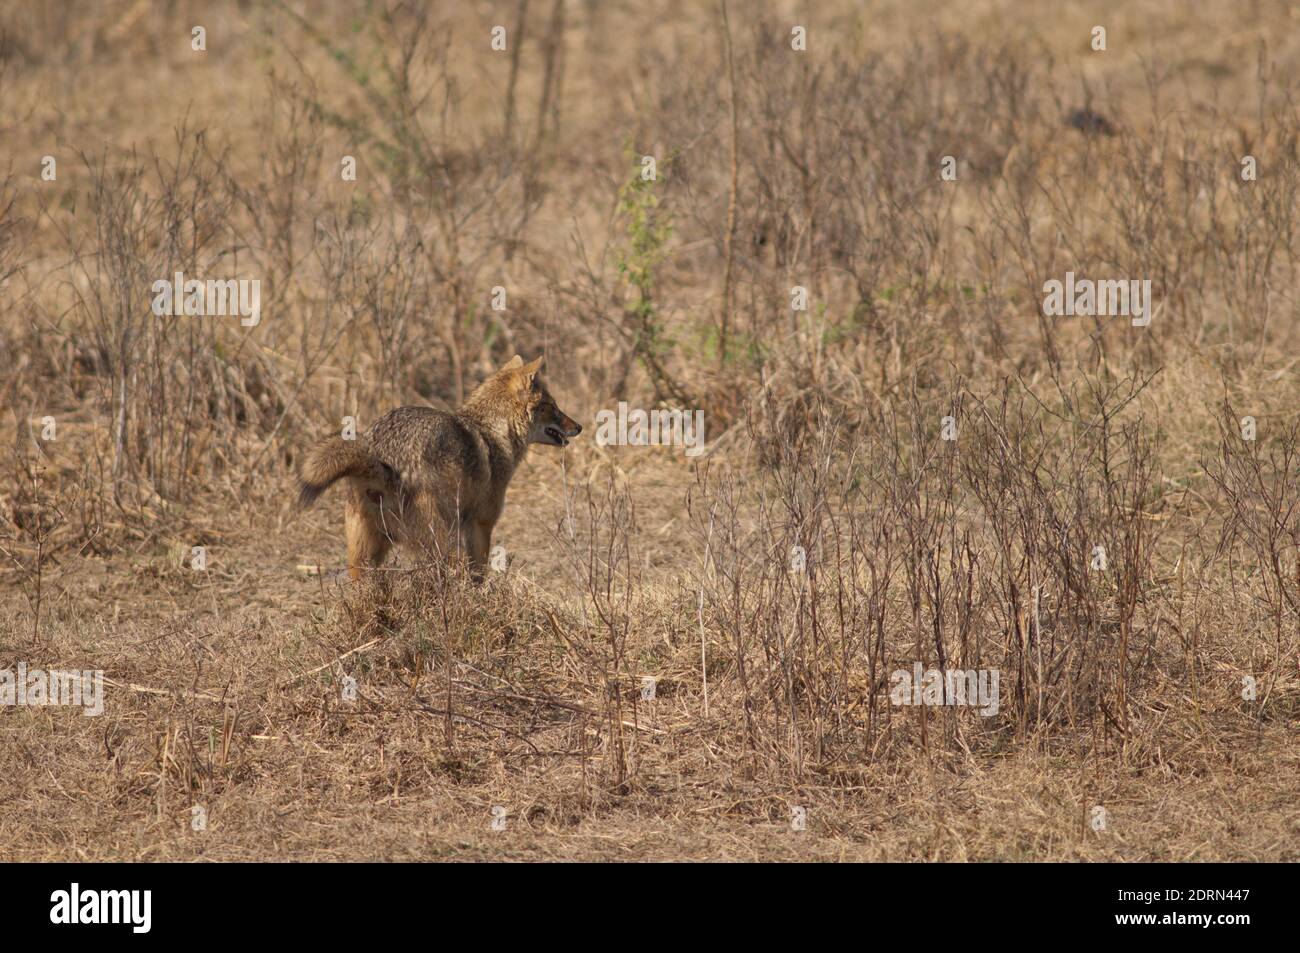 Il jackal d'oro Canis aureus indica il profumo-contrassegno. Parco Nazionale Keoladeo Ghana. Bharatpur. Rajasthan. India. Foto Stock